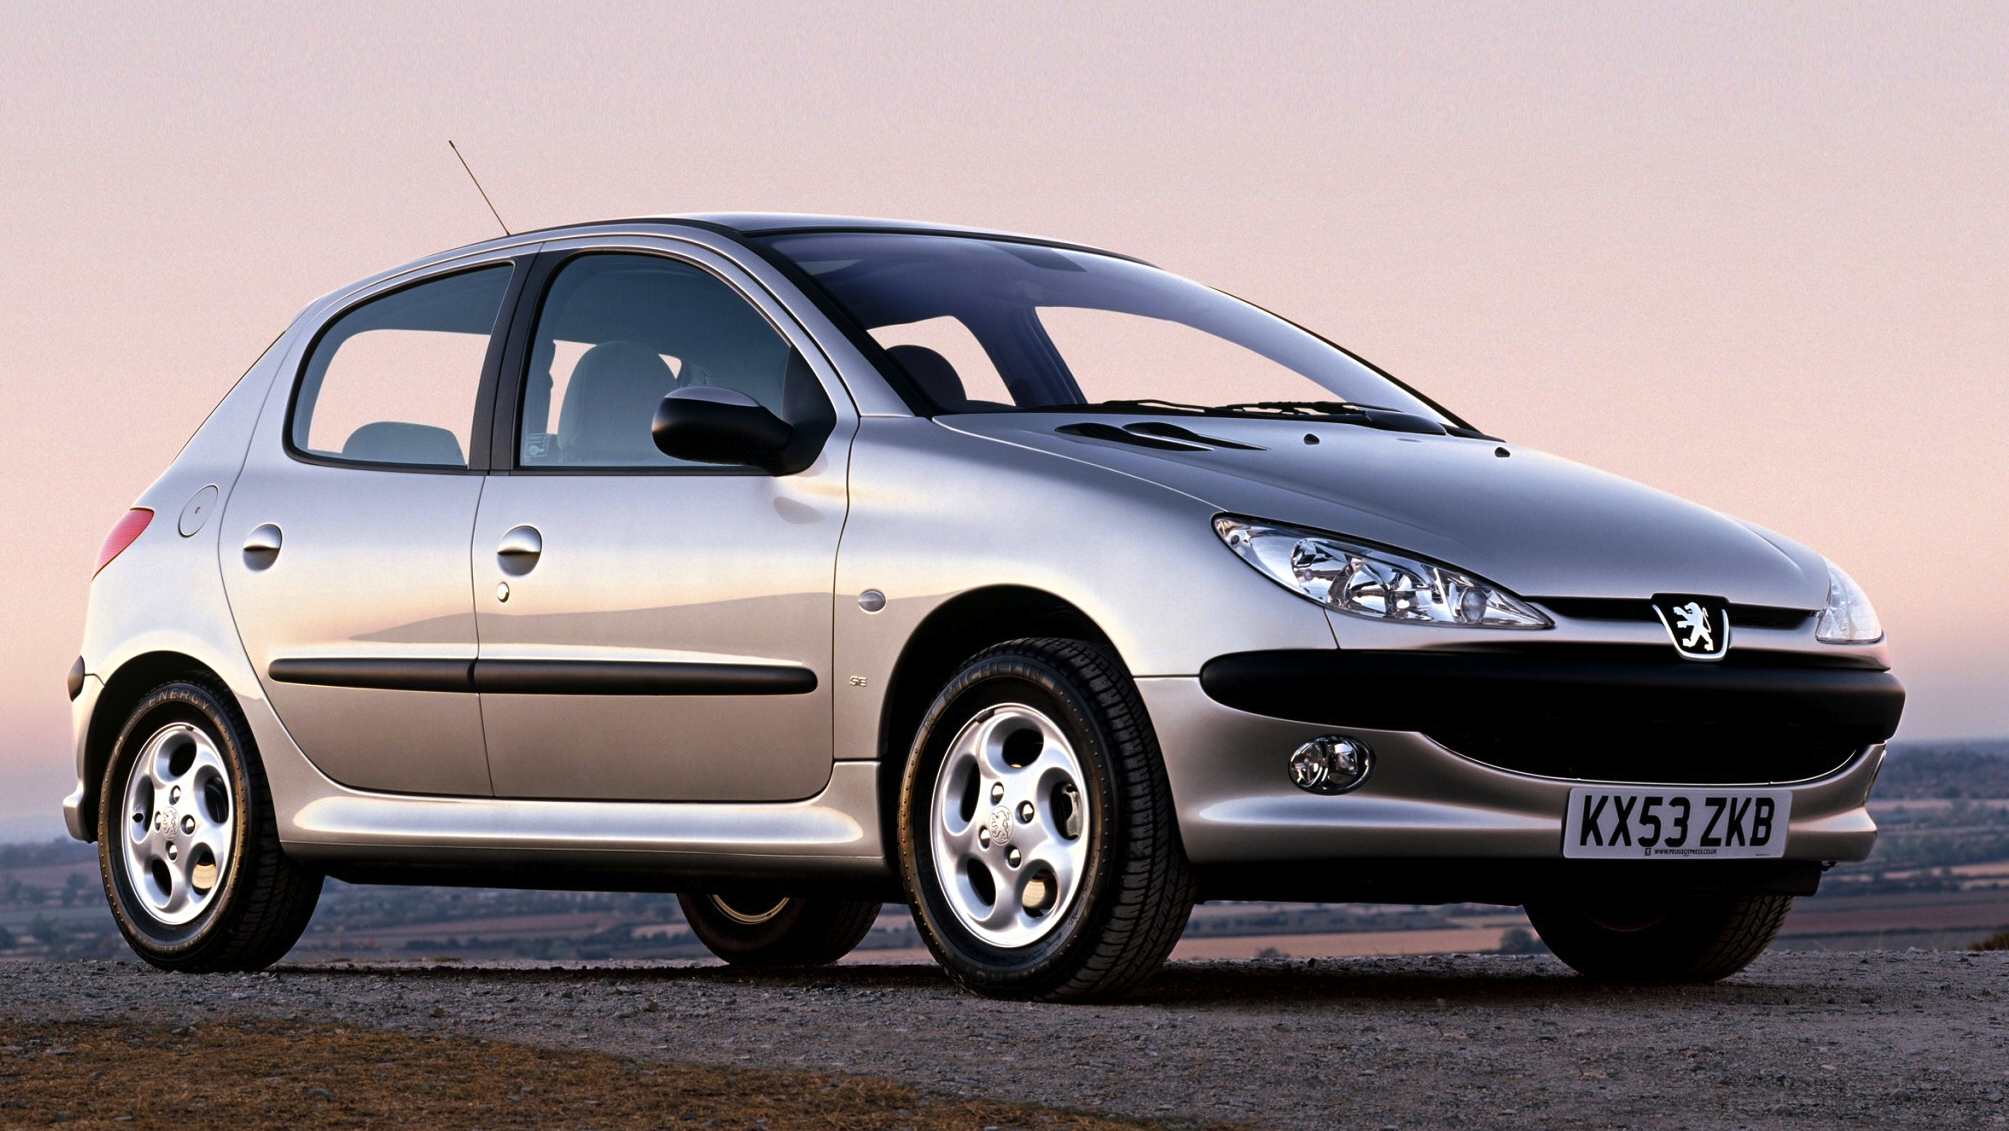 Europe 2003: Peugeot 206 most popular, Golf down to #2 – Best